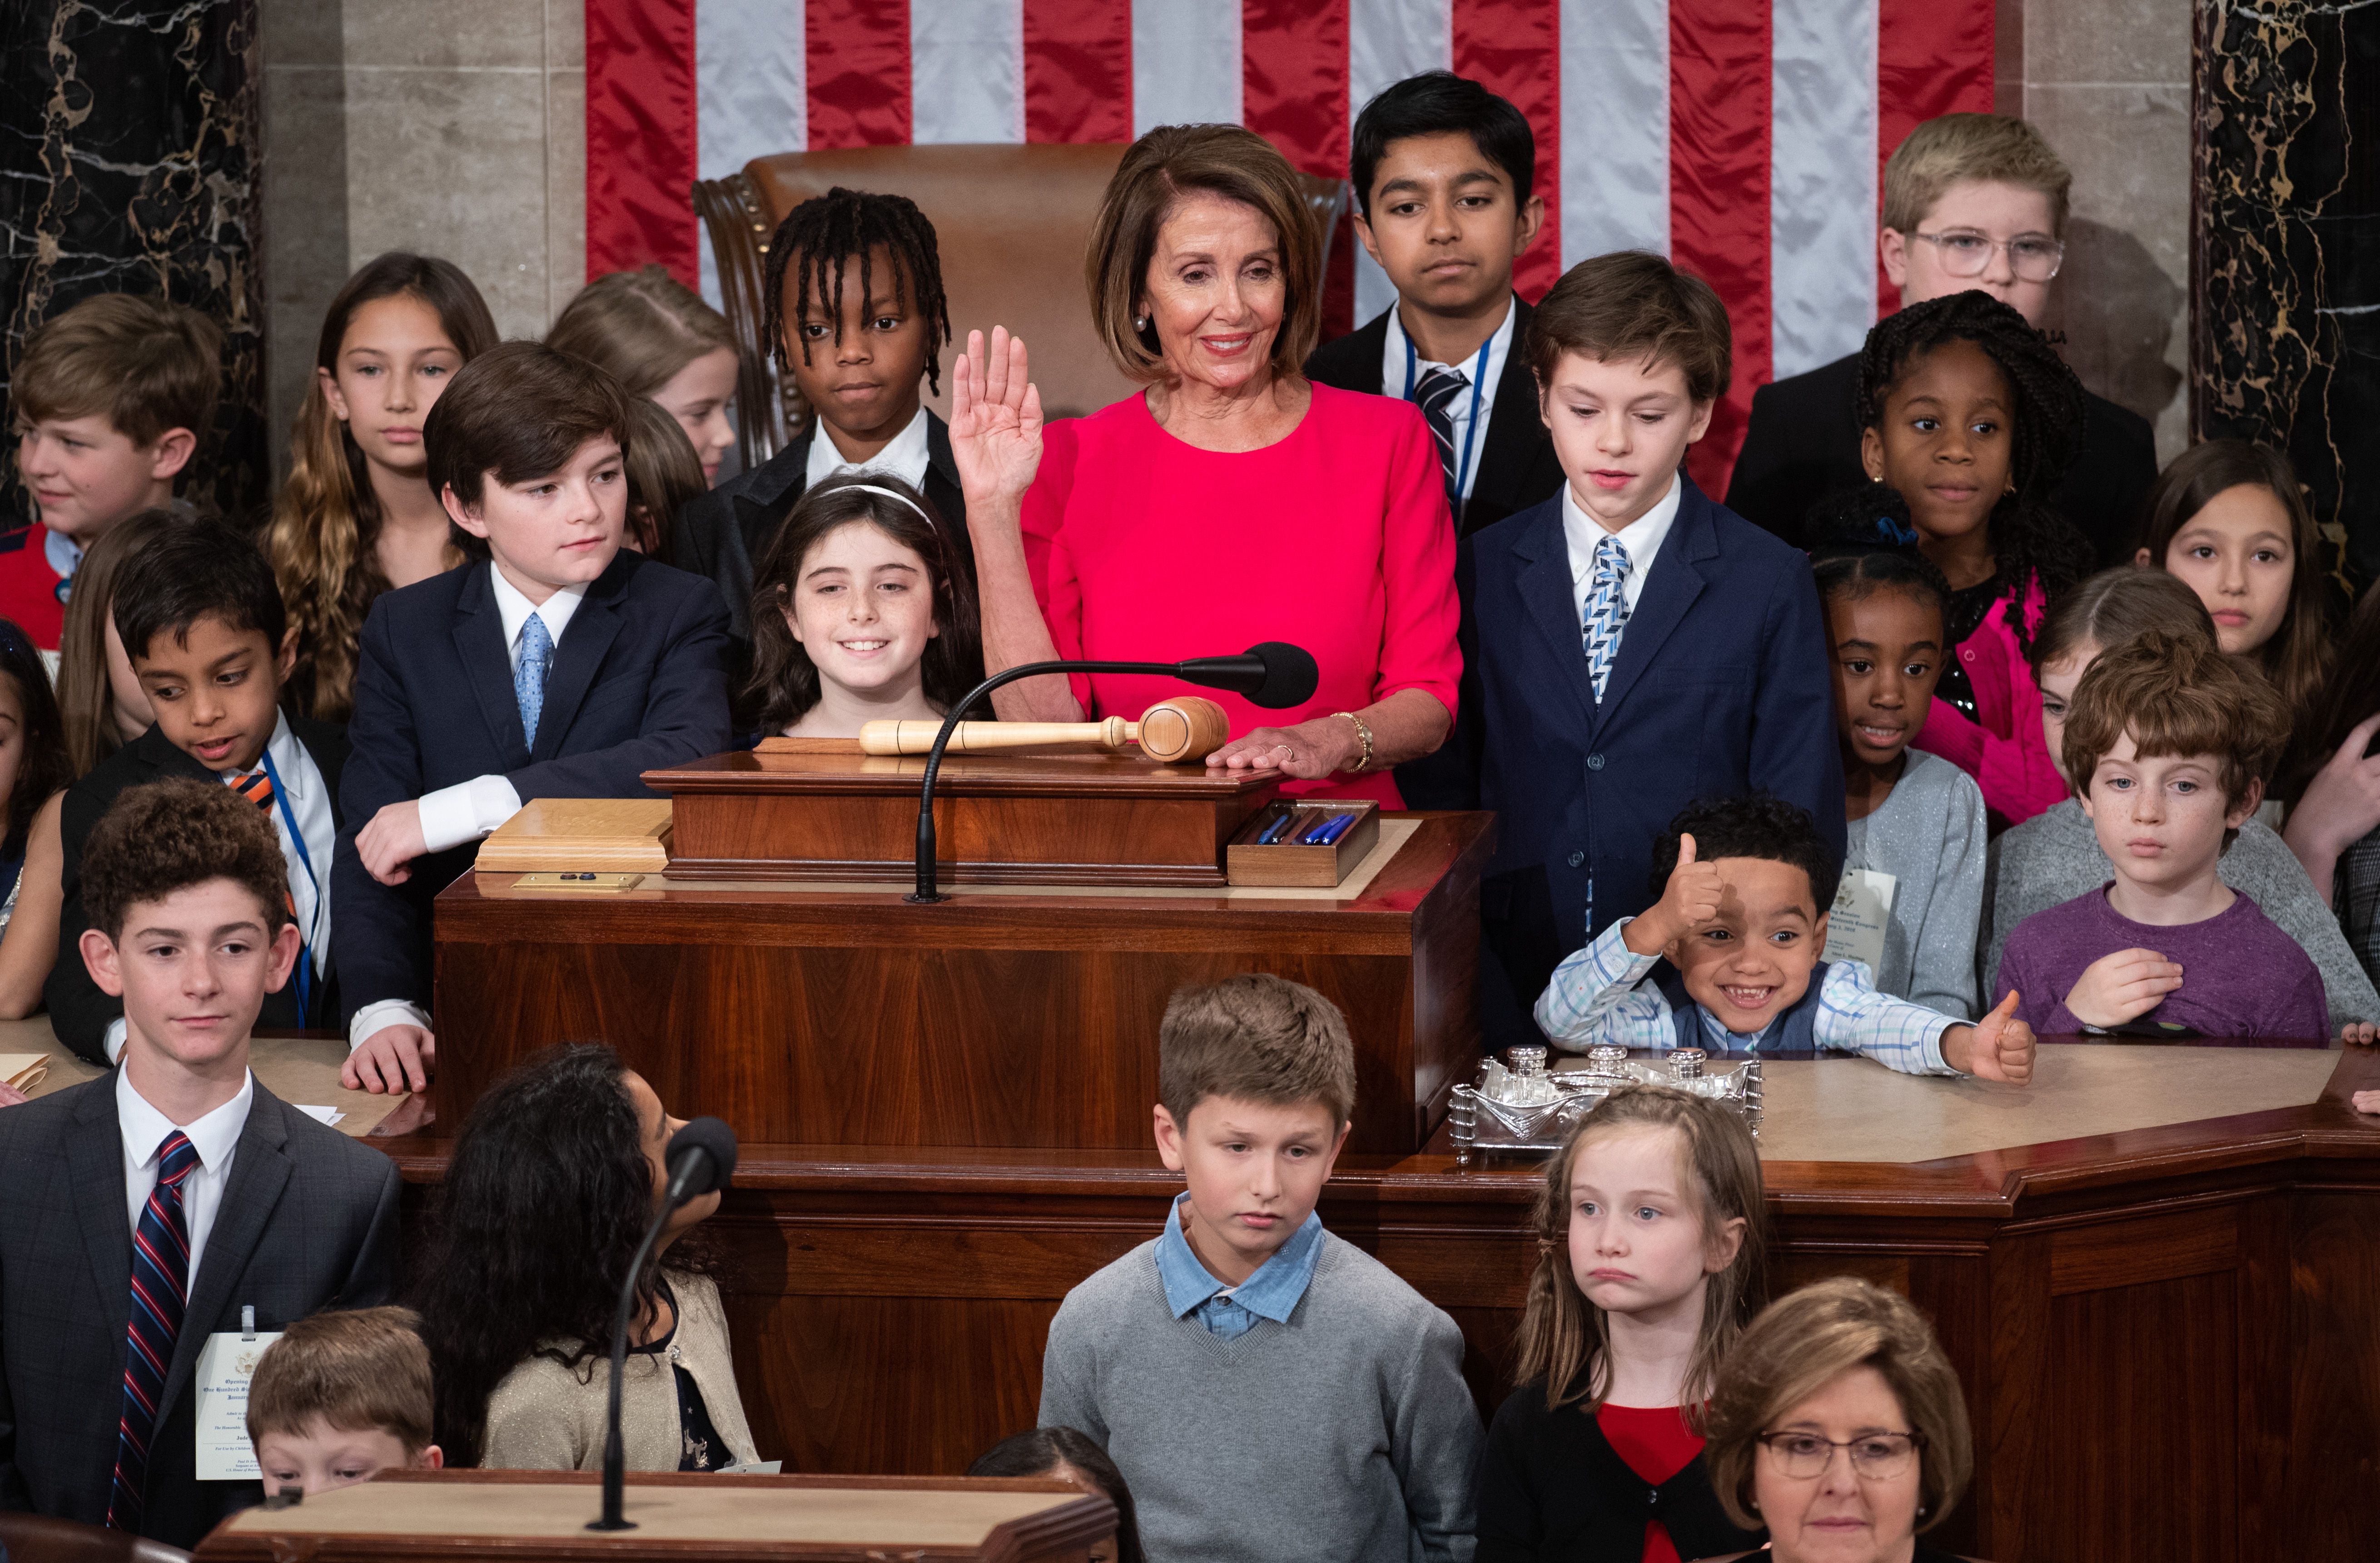 Nancy Pelosi surrounded by children at the podium.